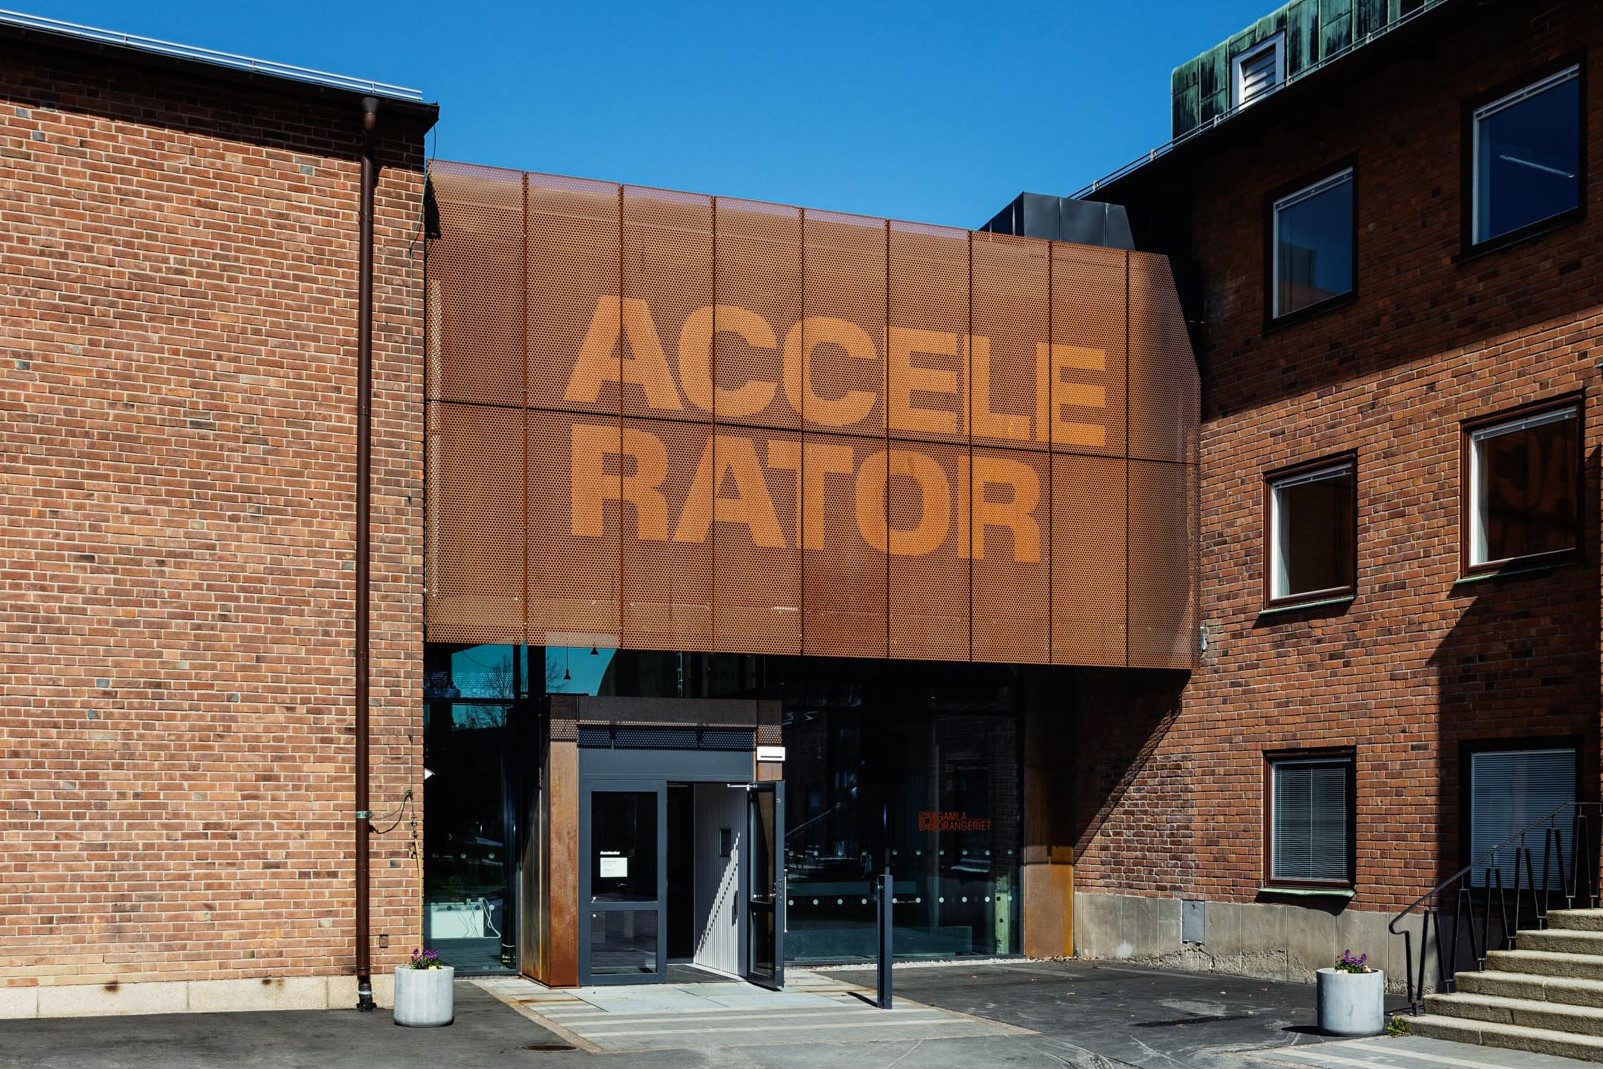 Accelerator is located in a rebuilt underground laboratory for accelerator physics. 